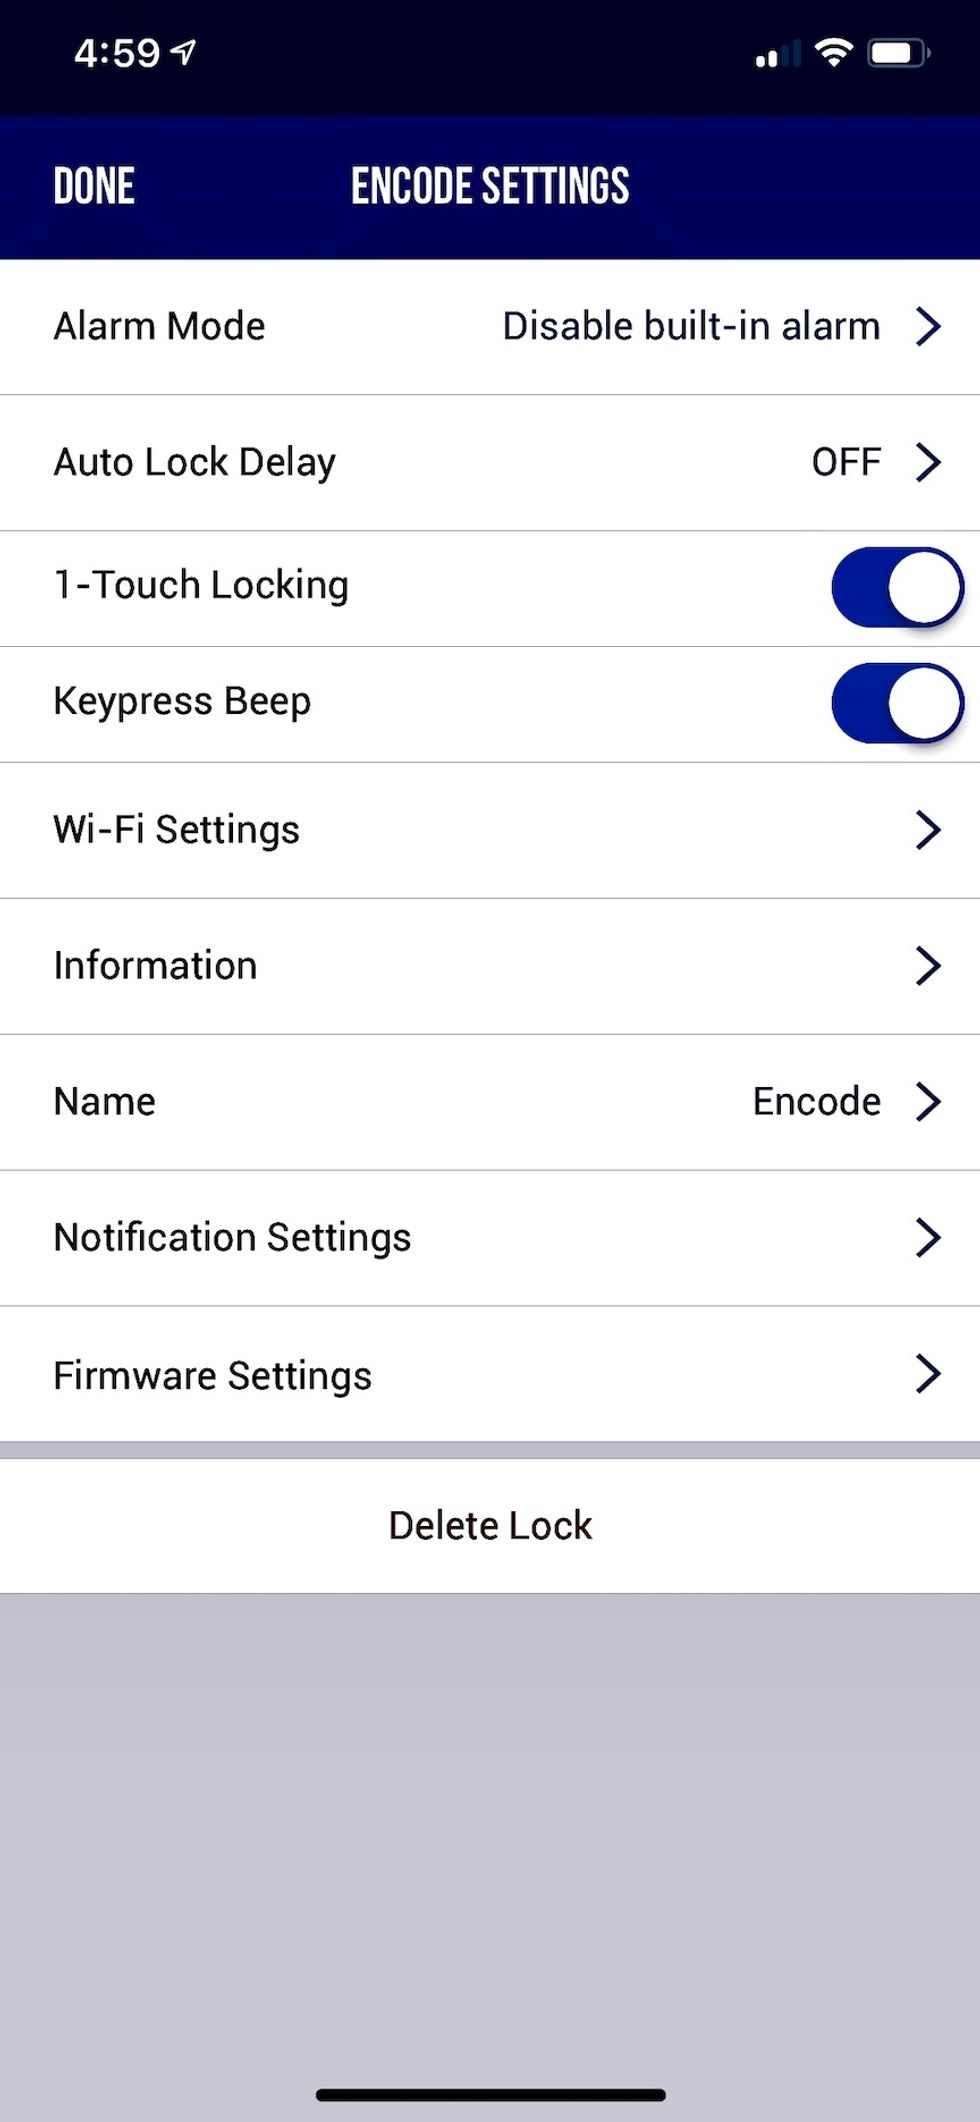 In the Schlage Home app, you can manage details such as one-touch locking